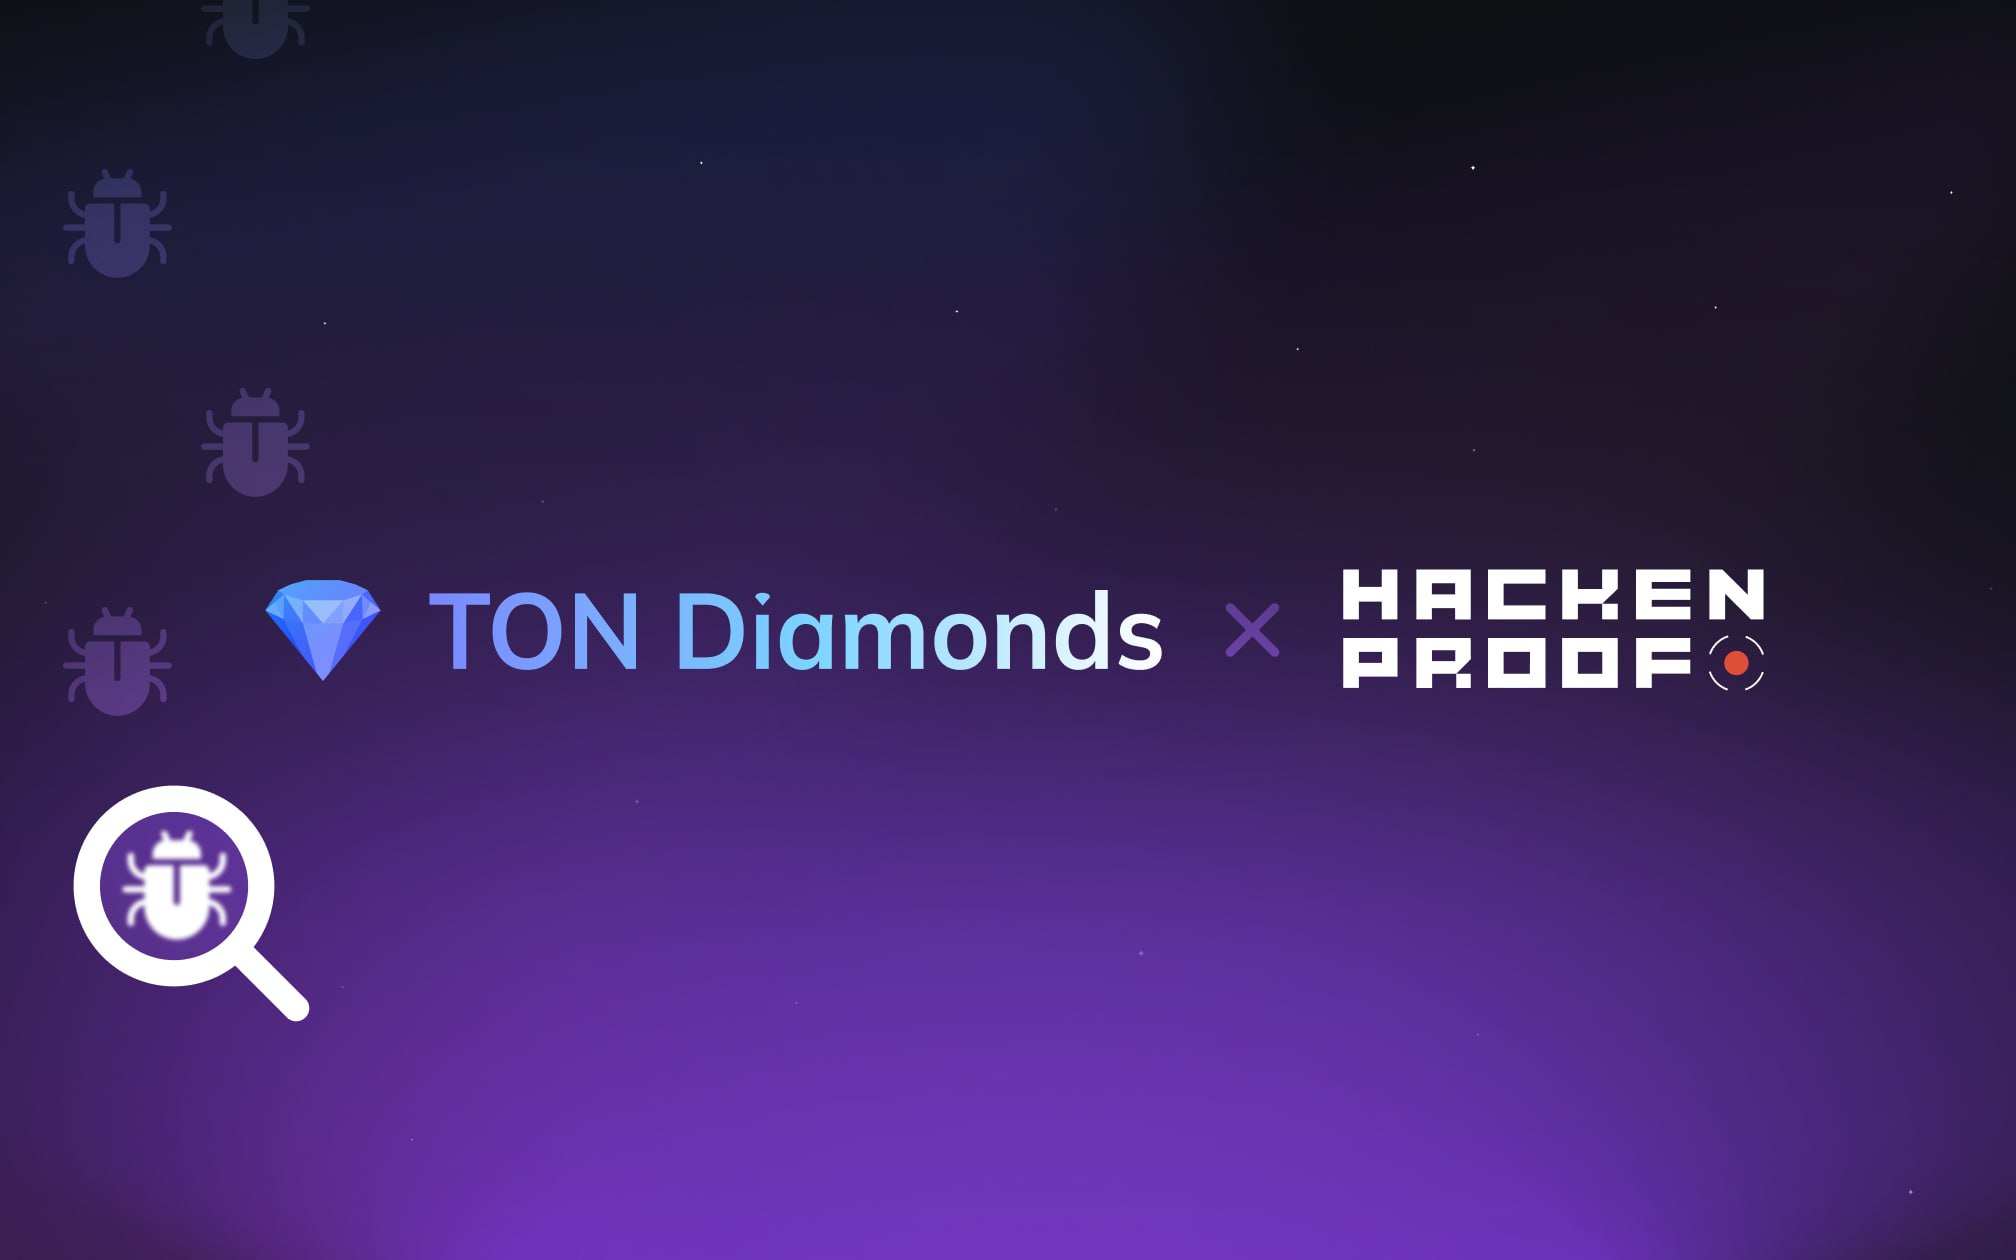 TON Diamonds has launched a bug bounty program in collaboration with HackenProof.